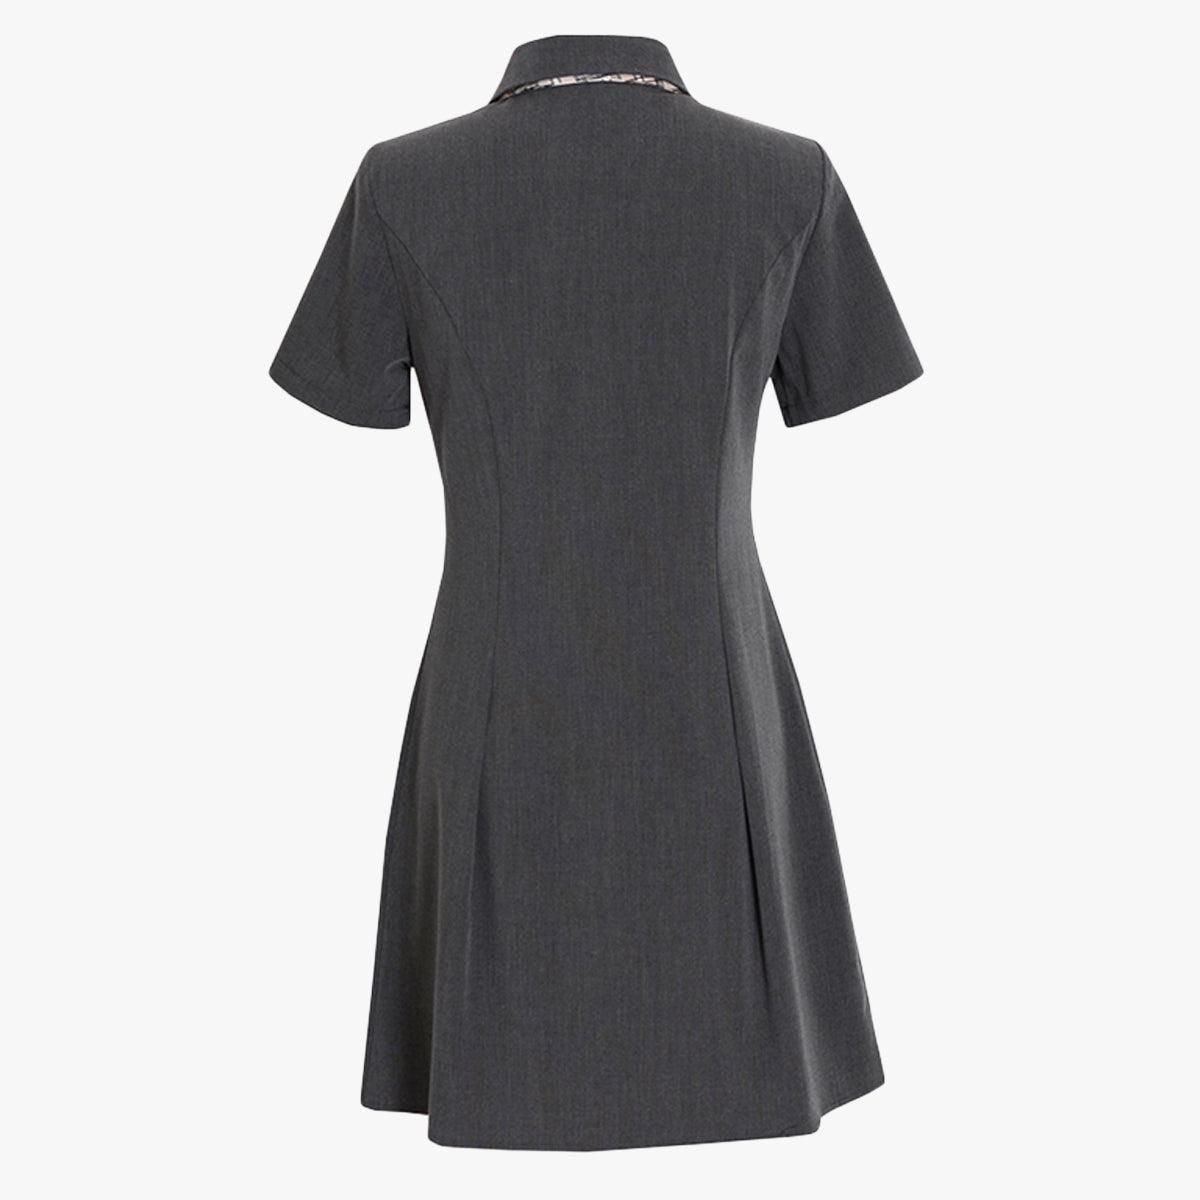 Japanese Student Style Gray Dress - Aesthetic Clothes Shop